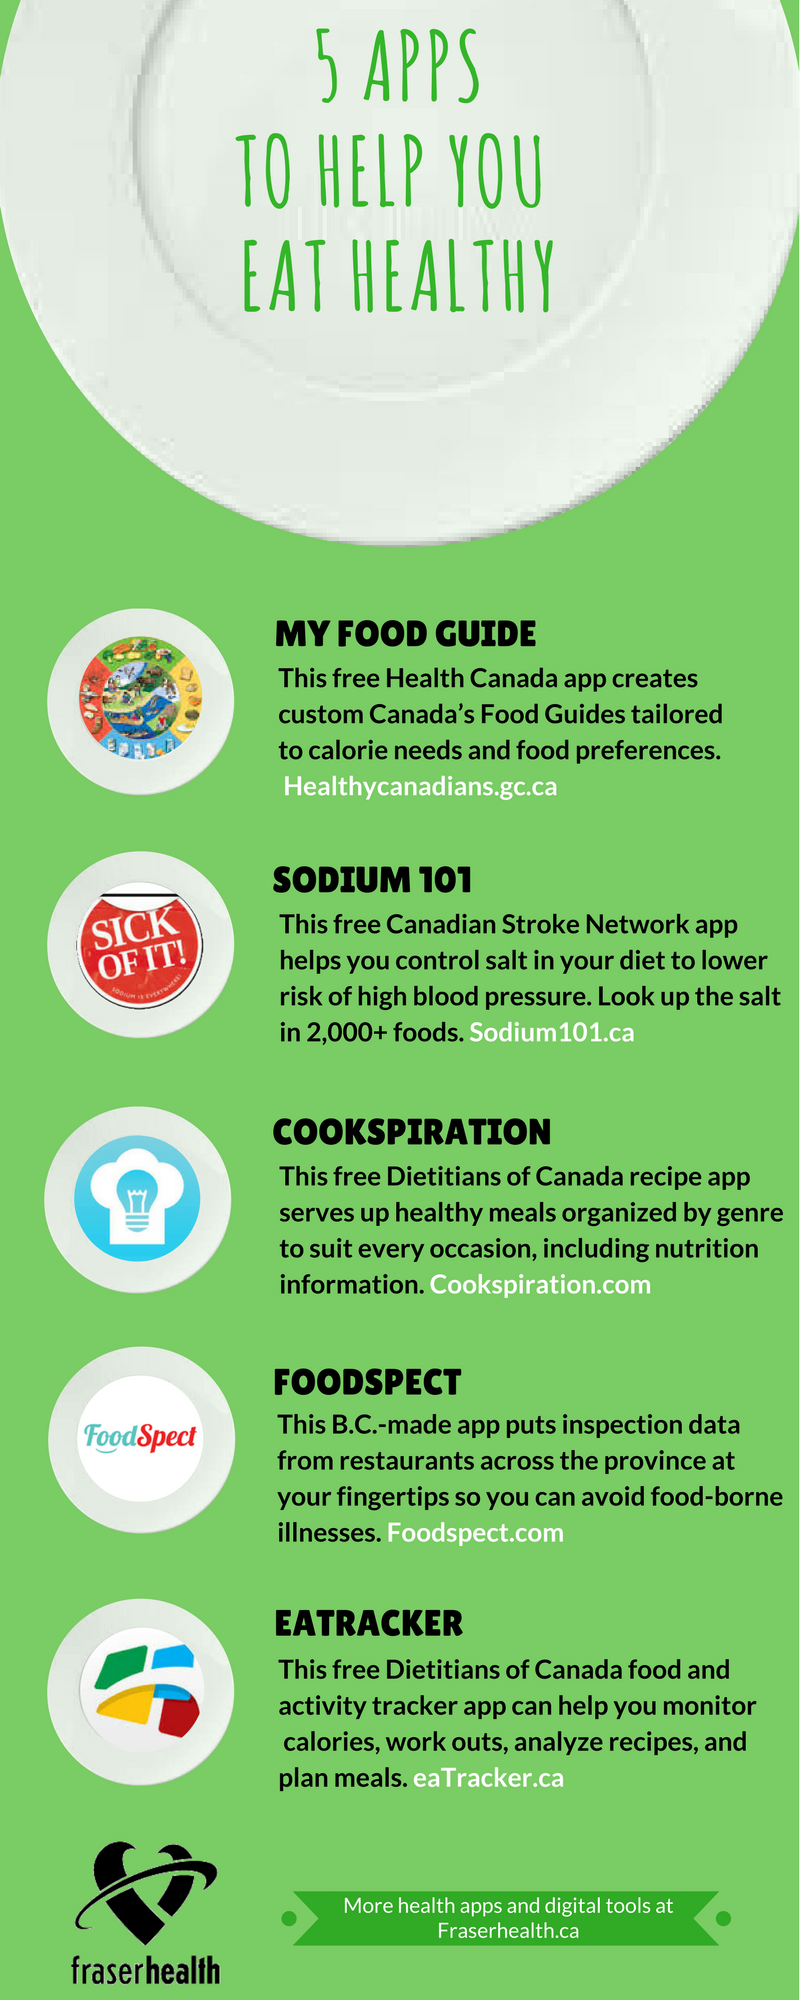 5 Apps to help you eat healthy